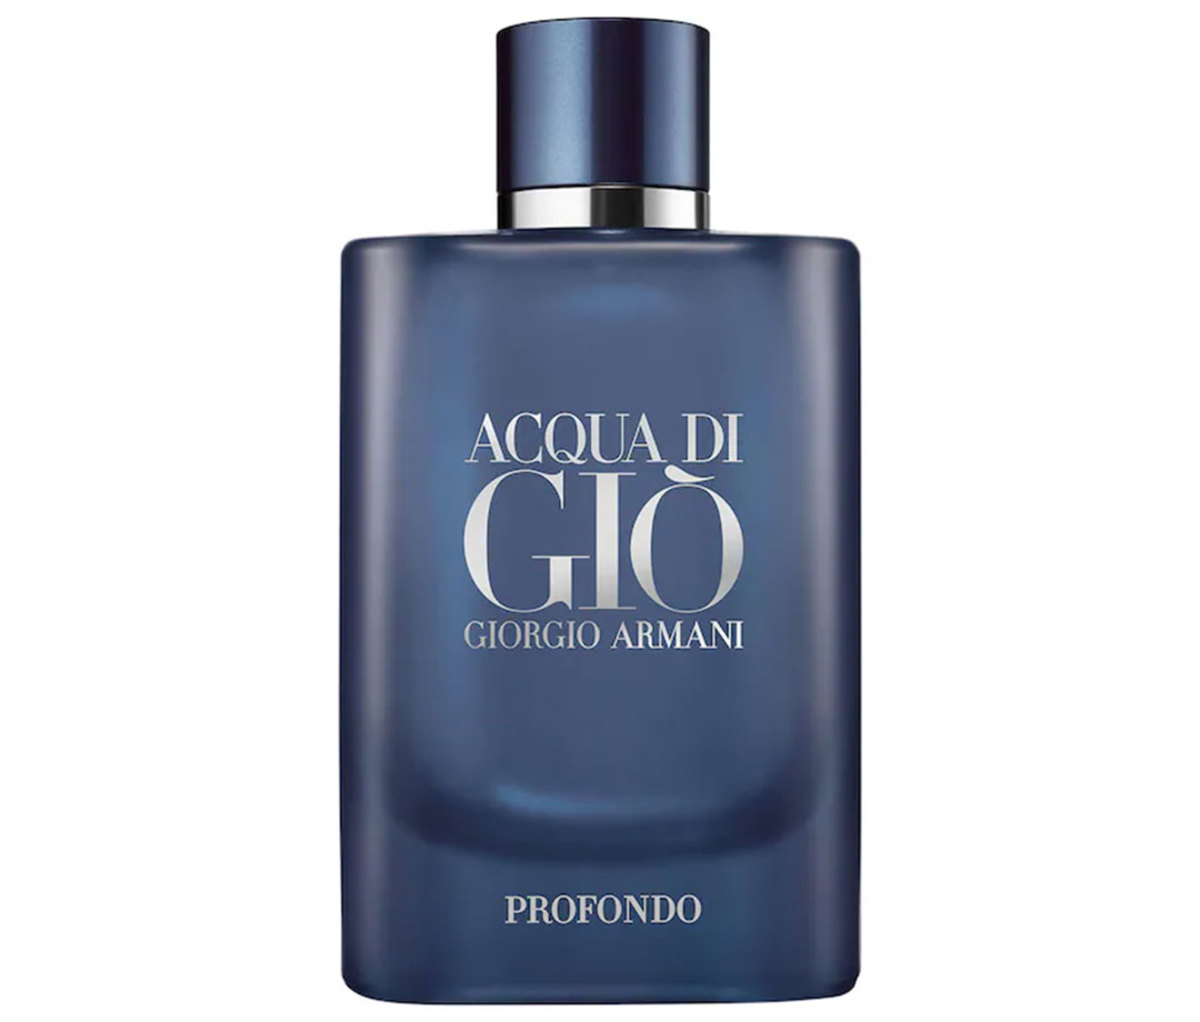 32 Best Men's Colognes of All Time - Sports Illustrated